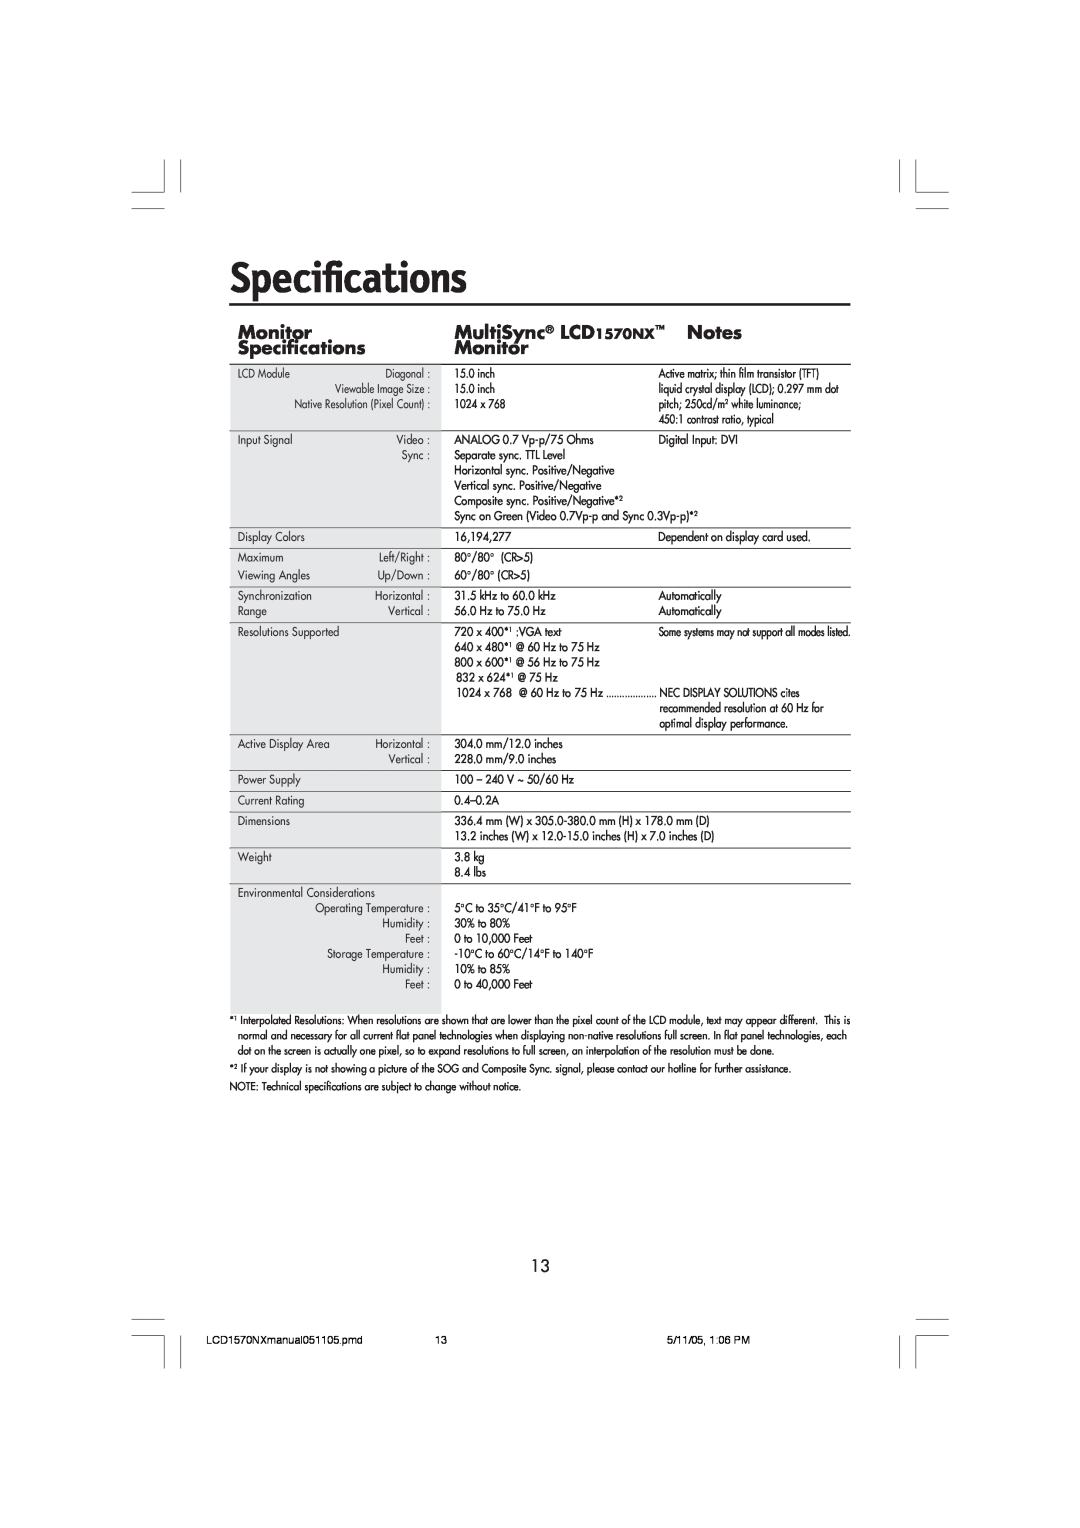 NEC user manual Specifications, Monitor, MultiSync LCD1570NX 